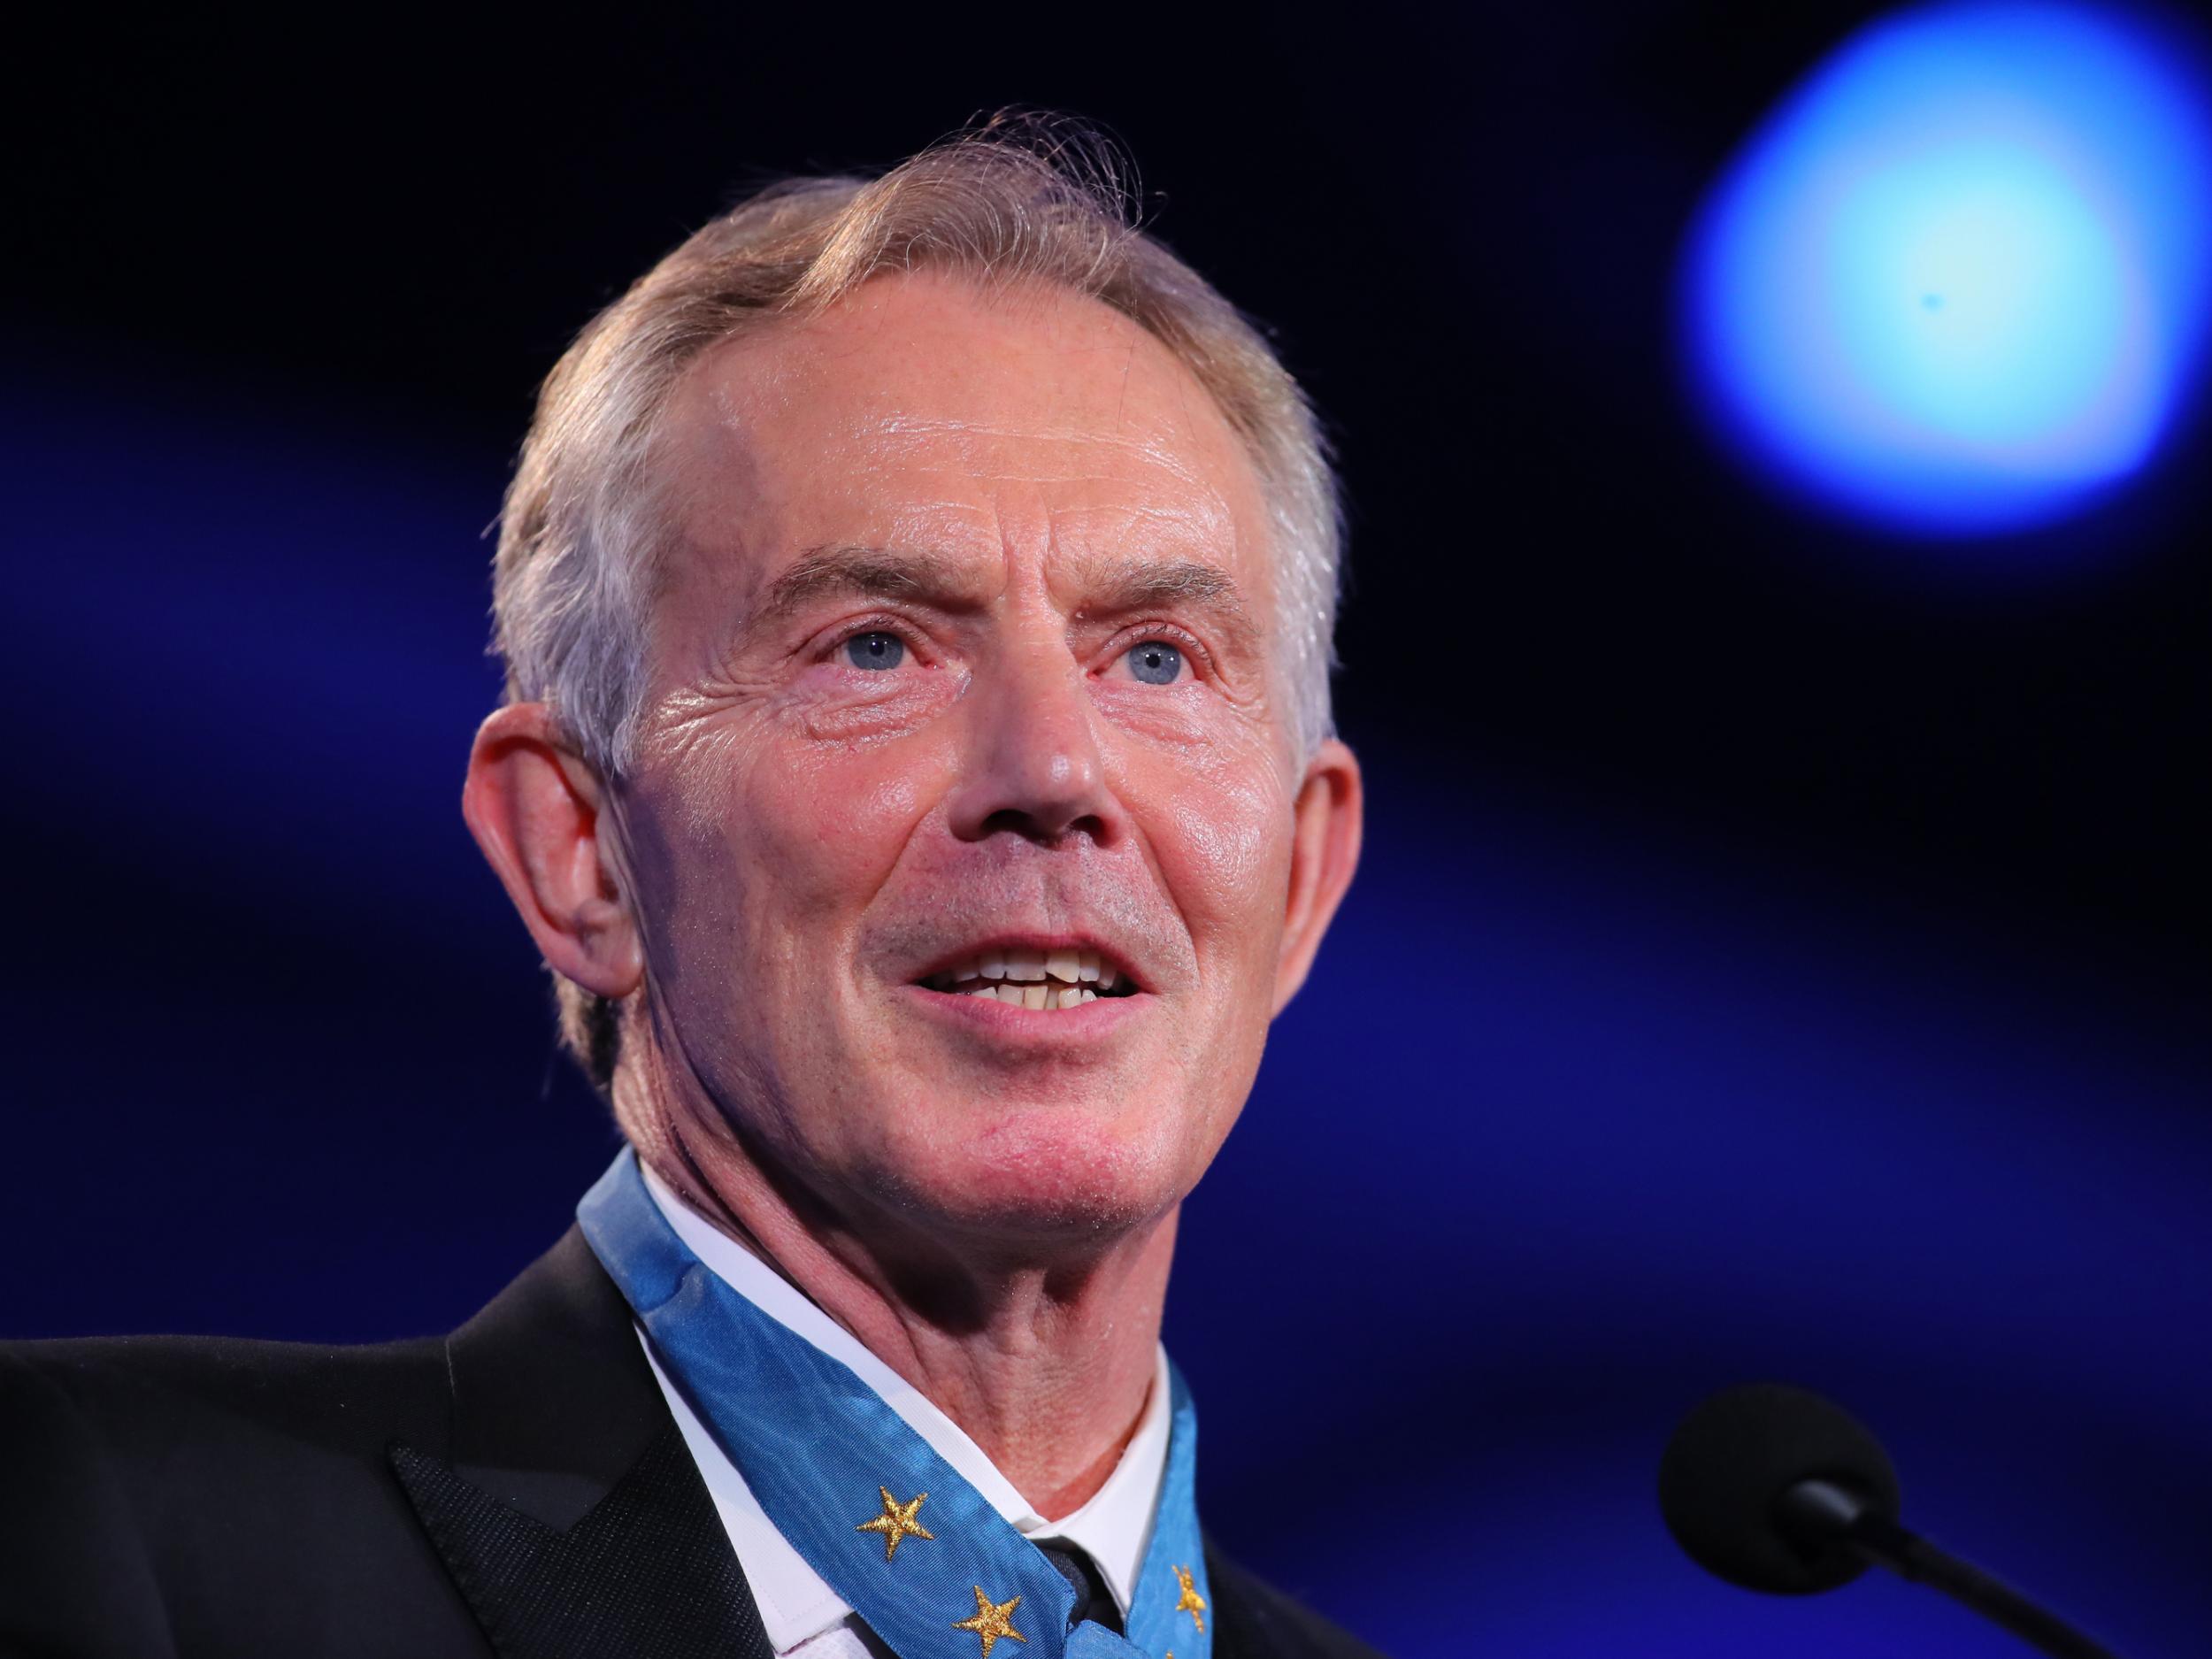 Jeremy Corbyn is still popular with the party faithful - but the public at large prefer Tony Blair